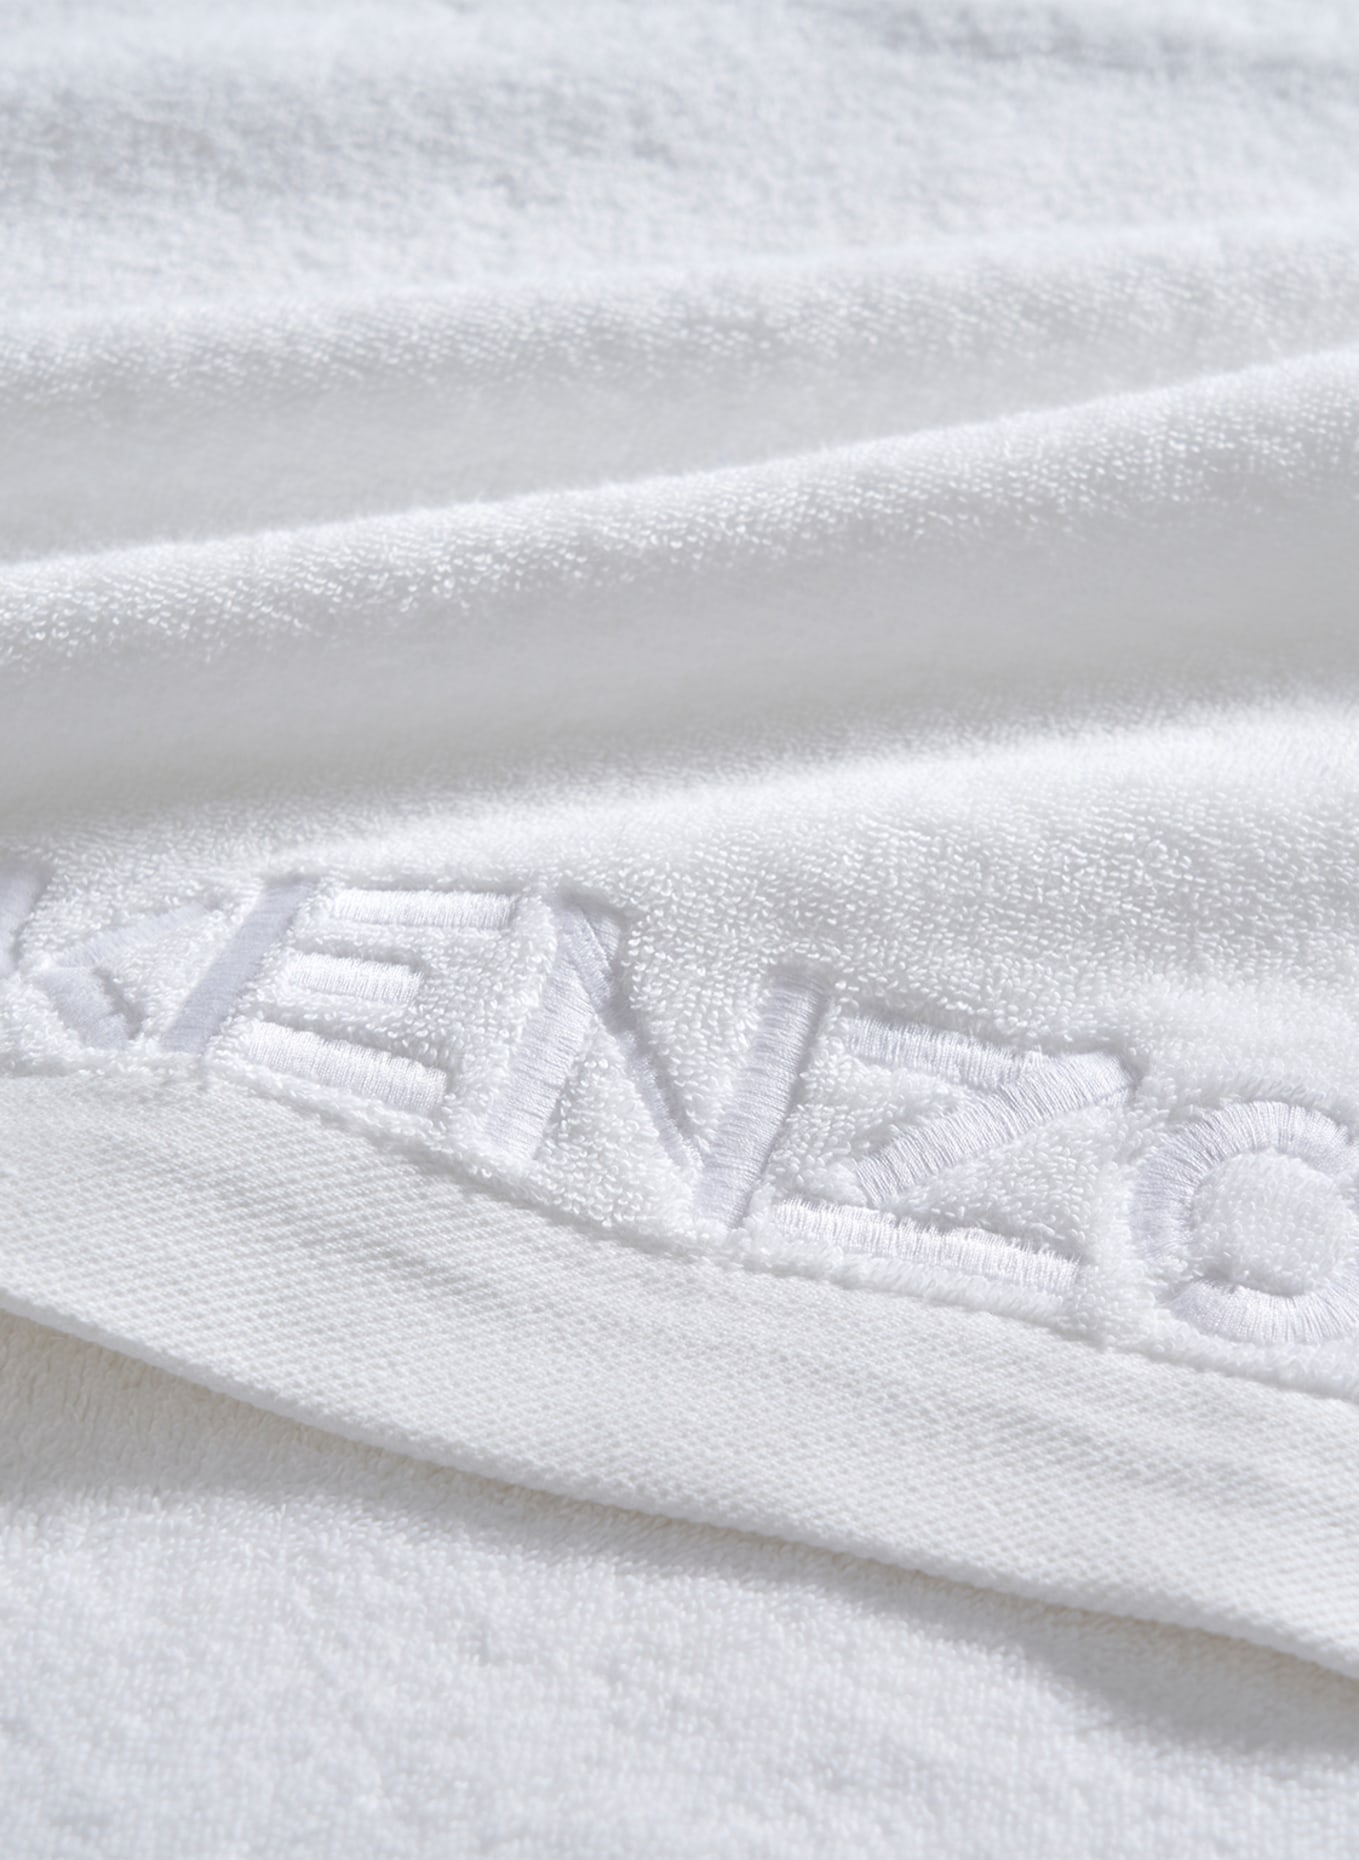 KENZO HOME Handtuch ICONIC, Farbe: WEISS (Bild 6)